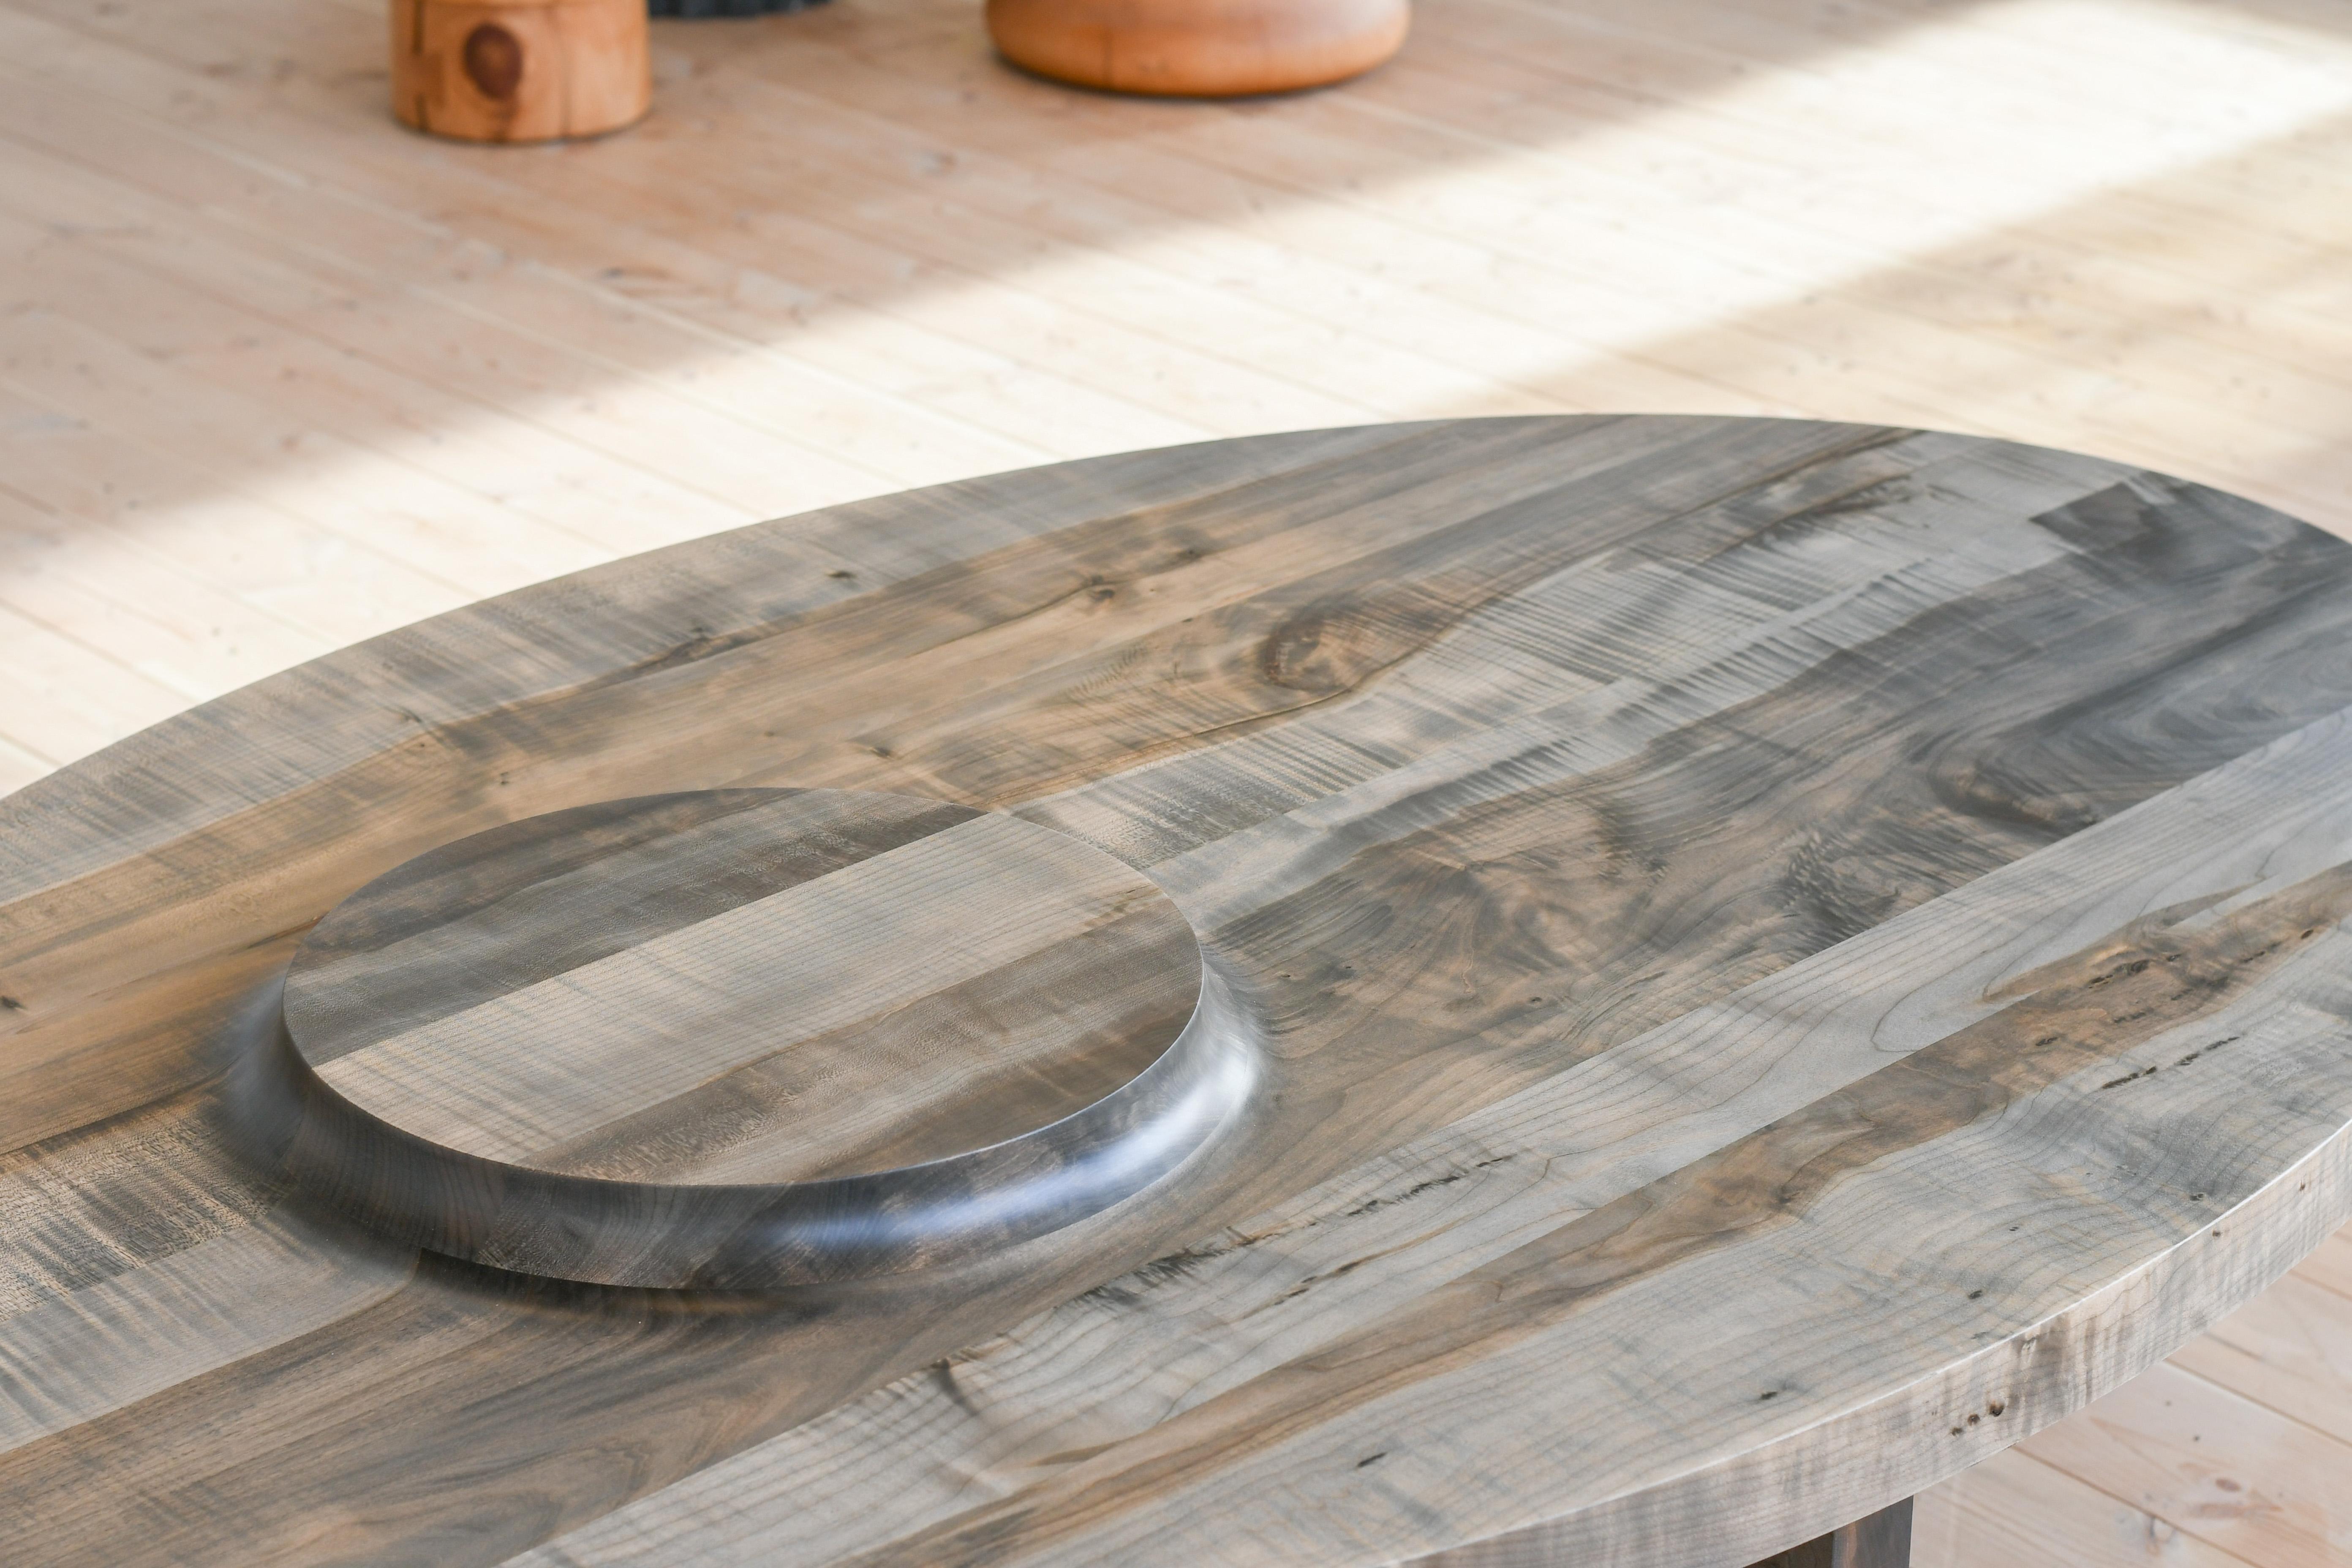 Canadian Mesa Table, Hand Carved Oval Coffee Table in Oxidized Maple